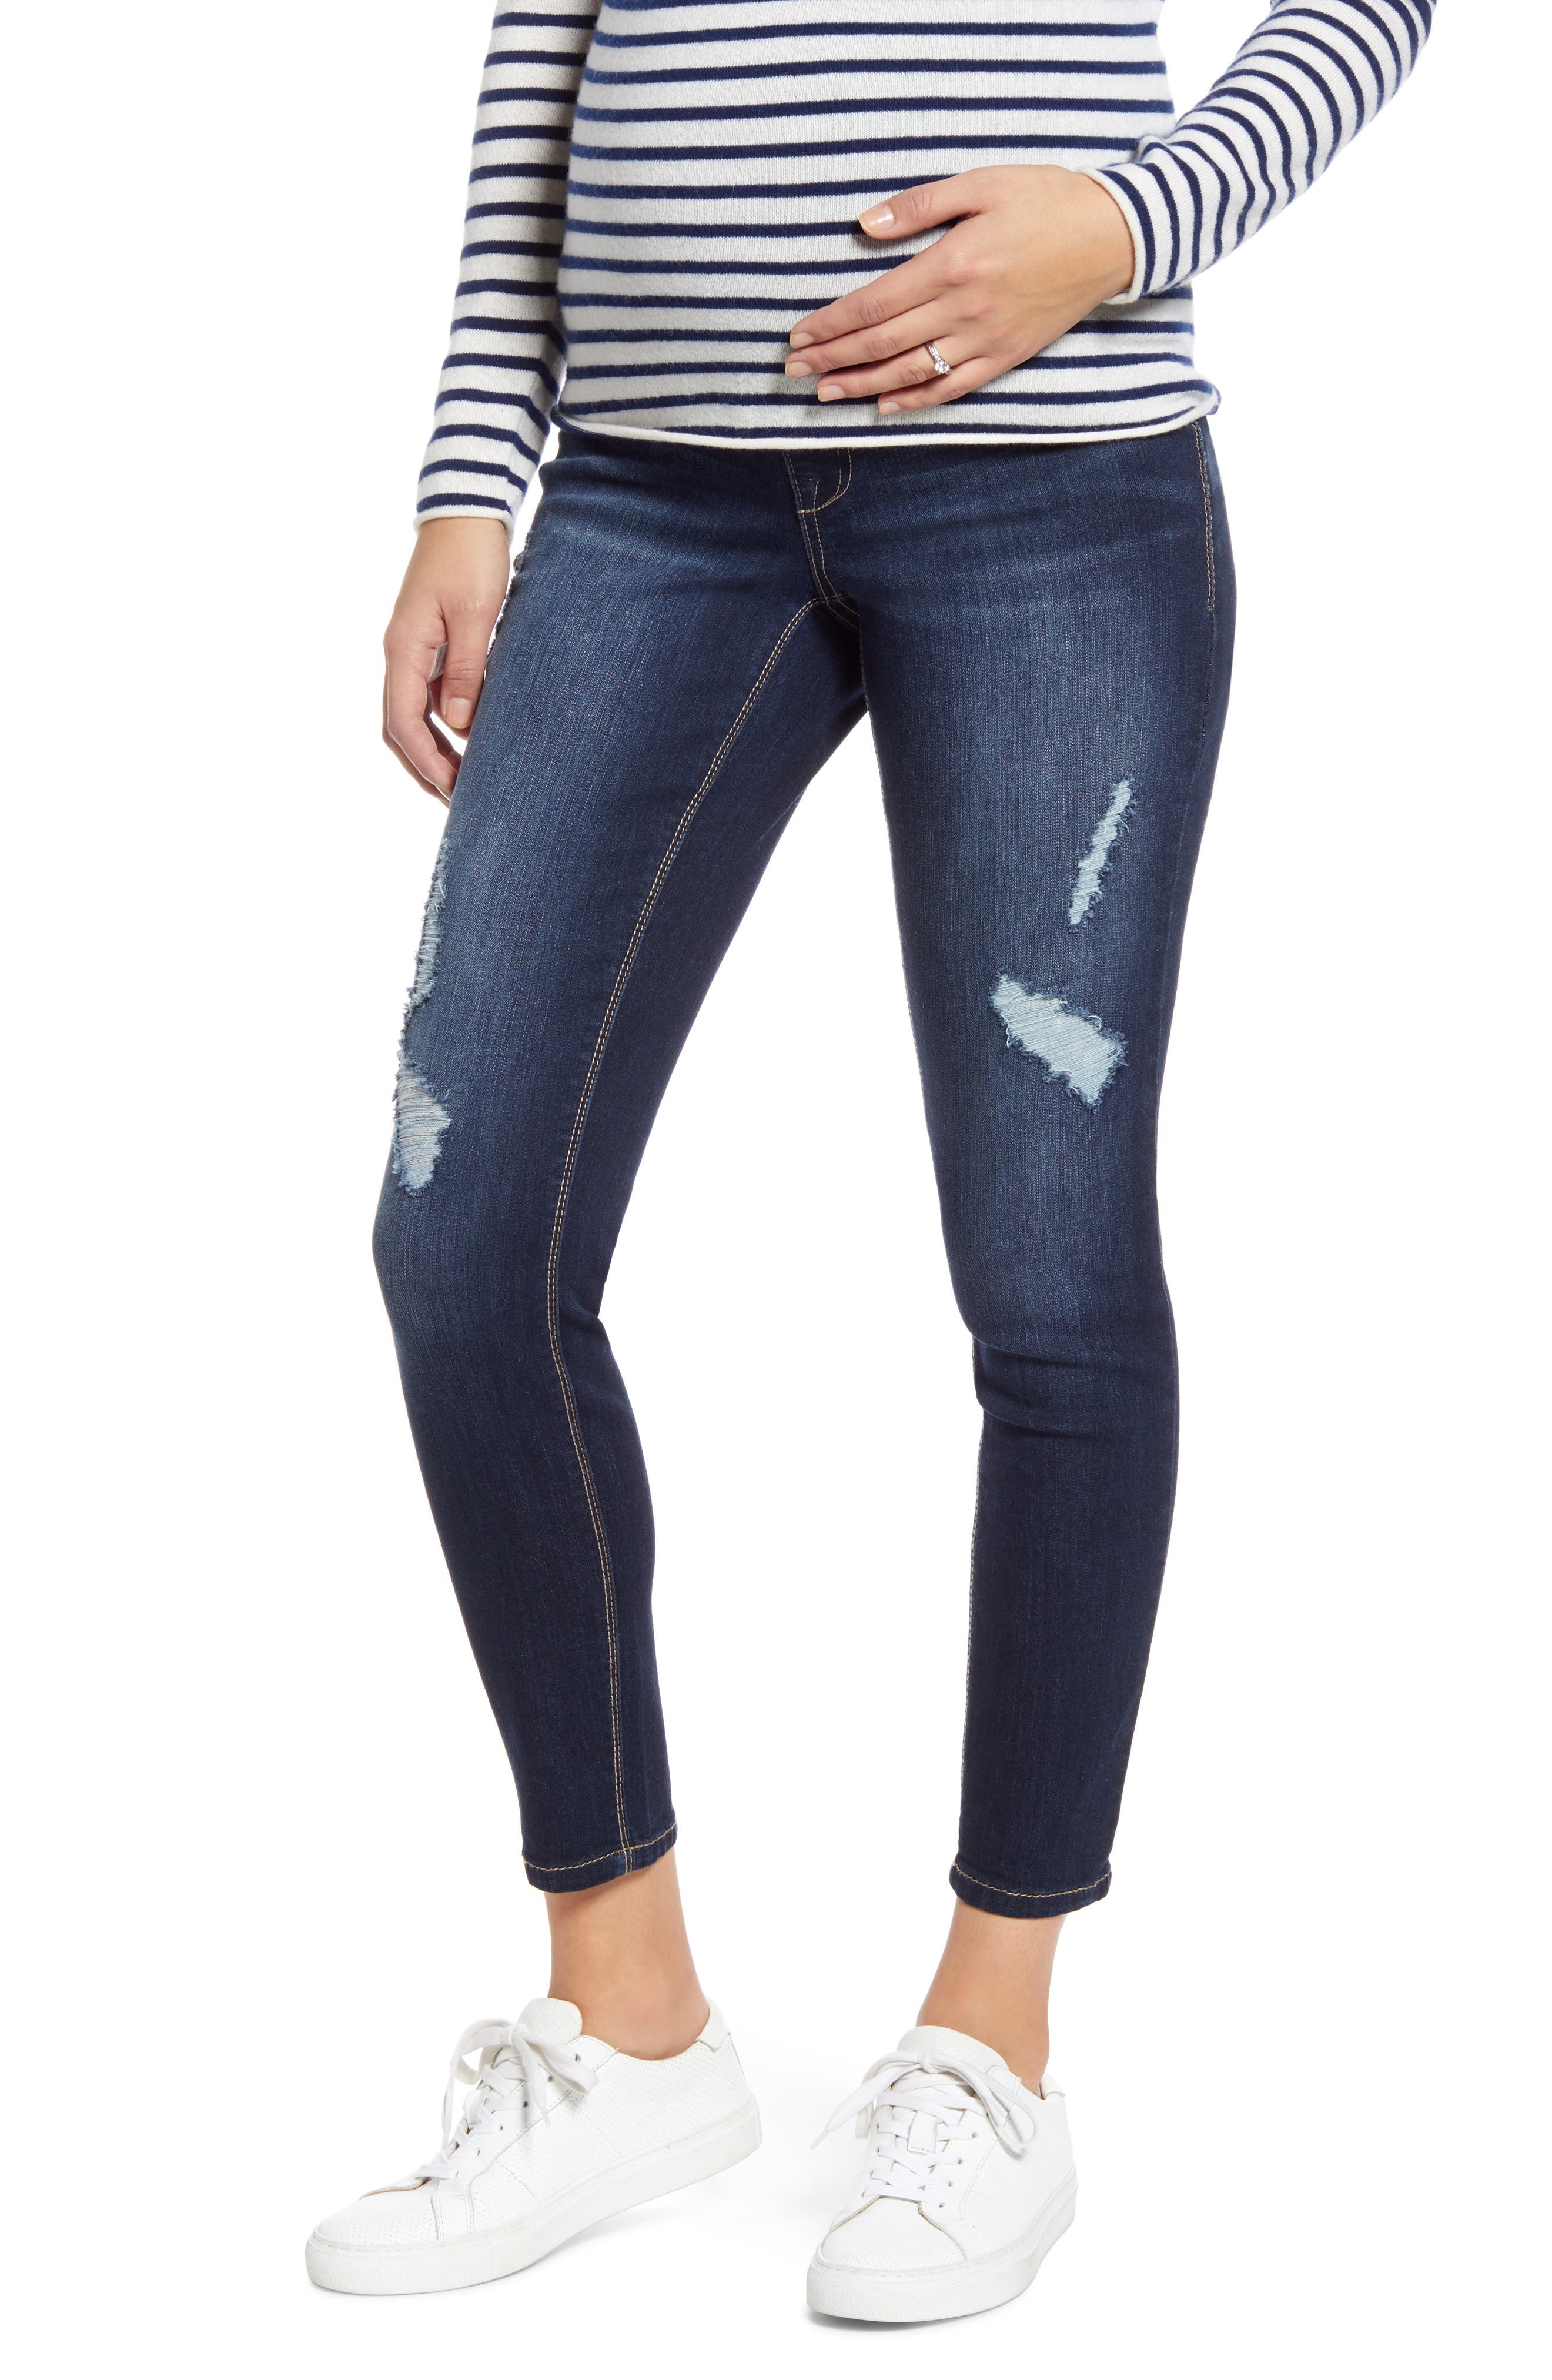 1822 ankle skinny jeans